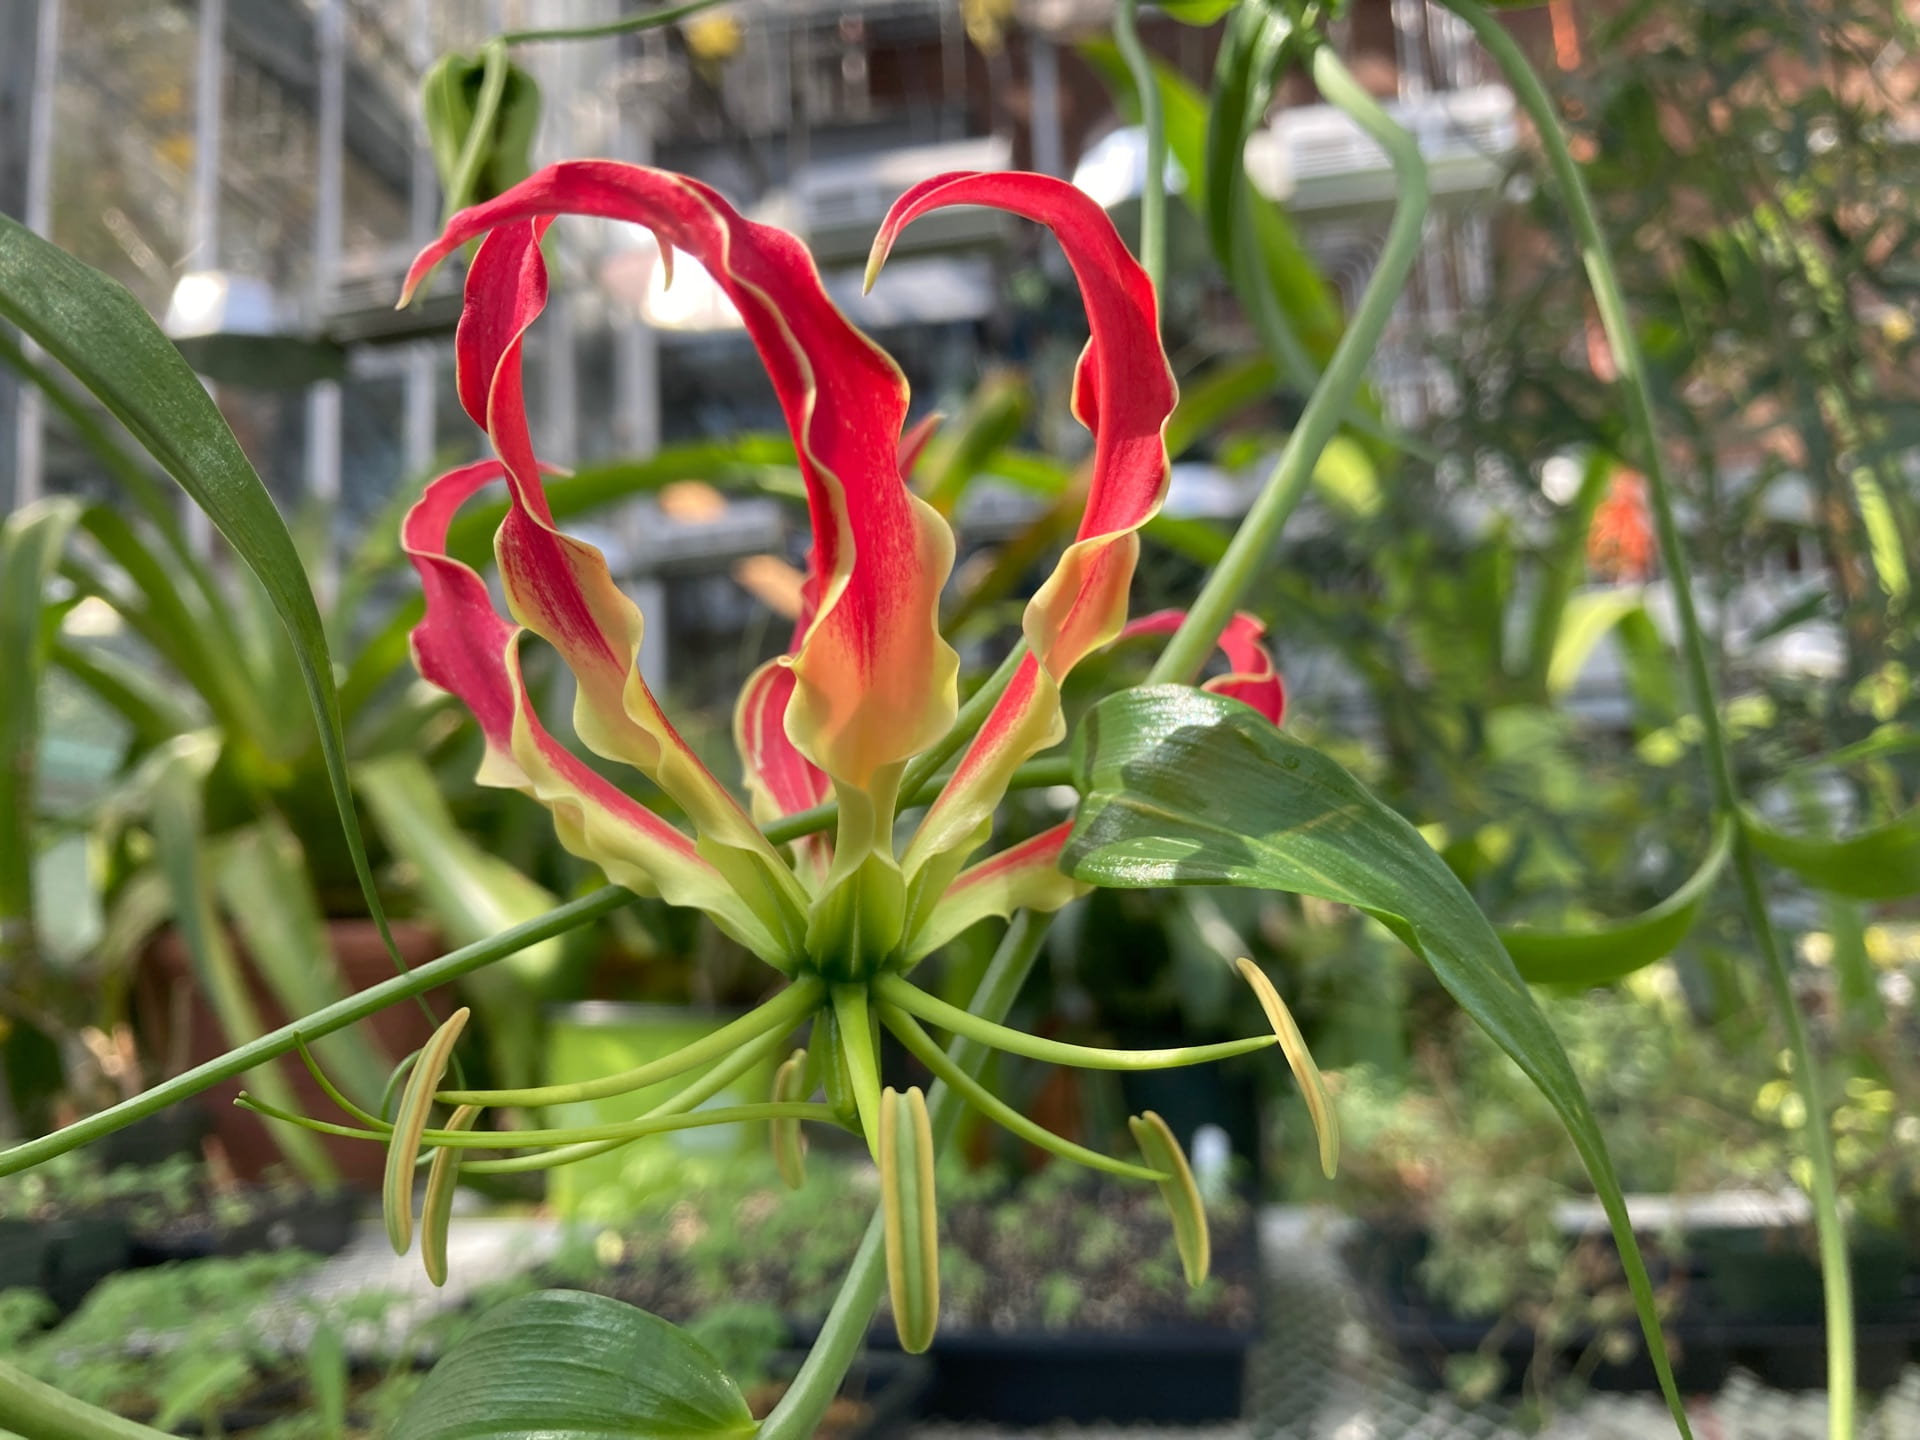 The Gloriosa lily, Gloriosa superba, was dormant just a few weeks ago, and is now blooming with fiery flowers.